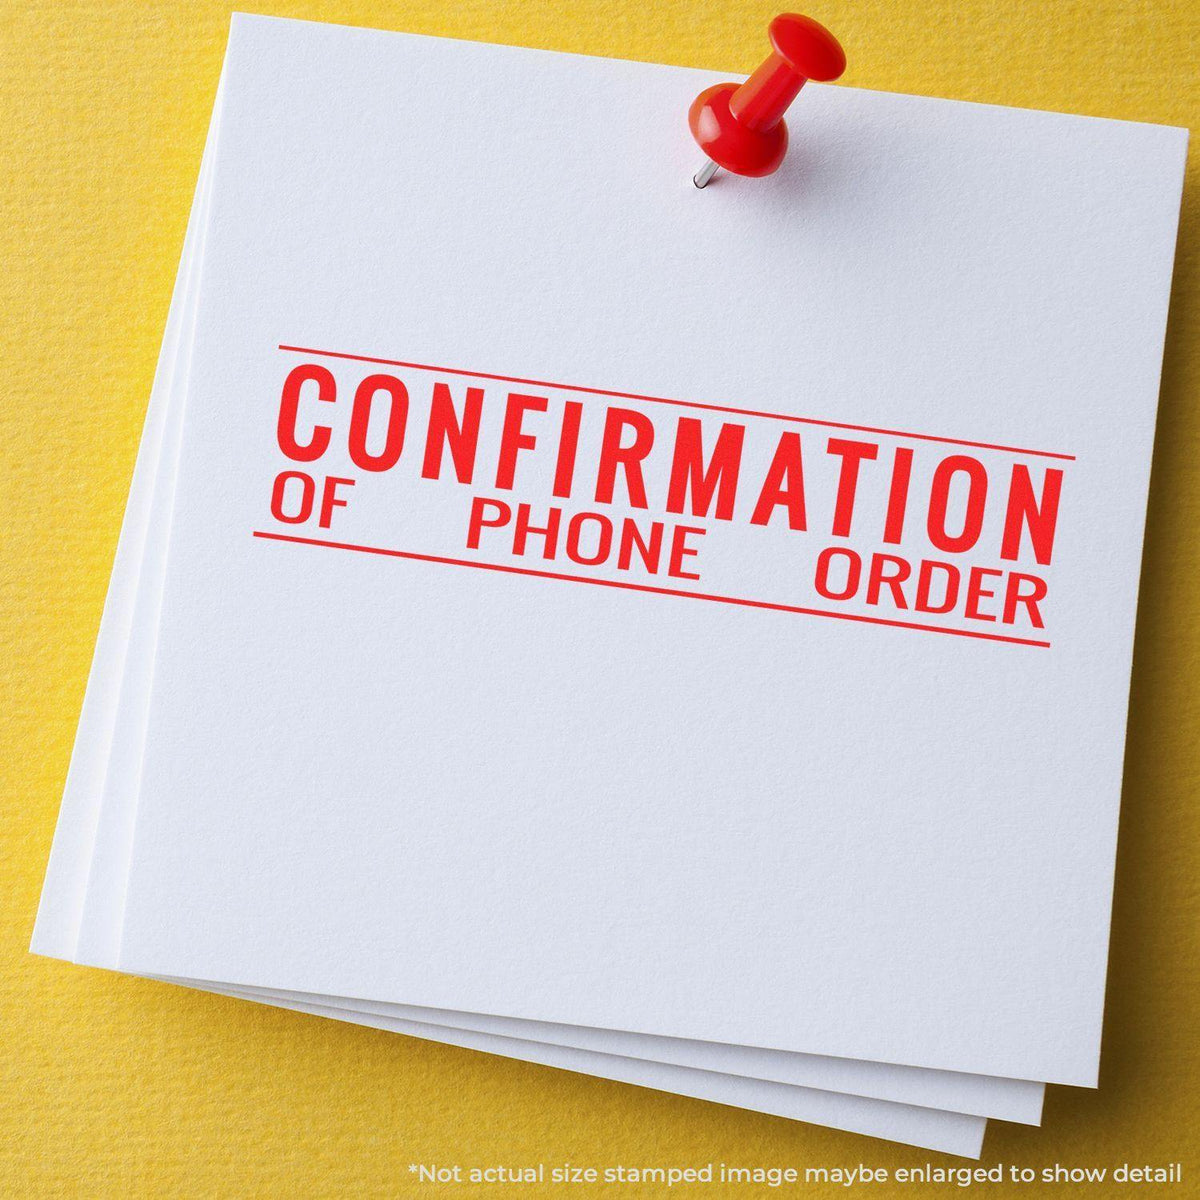 Confirmation of Phone Order Rubber Stamp In Use Photo